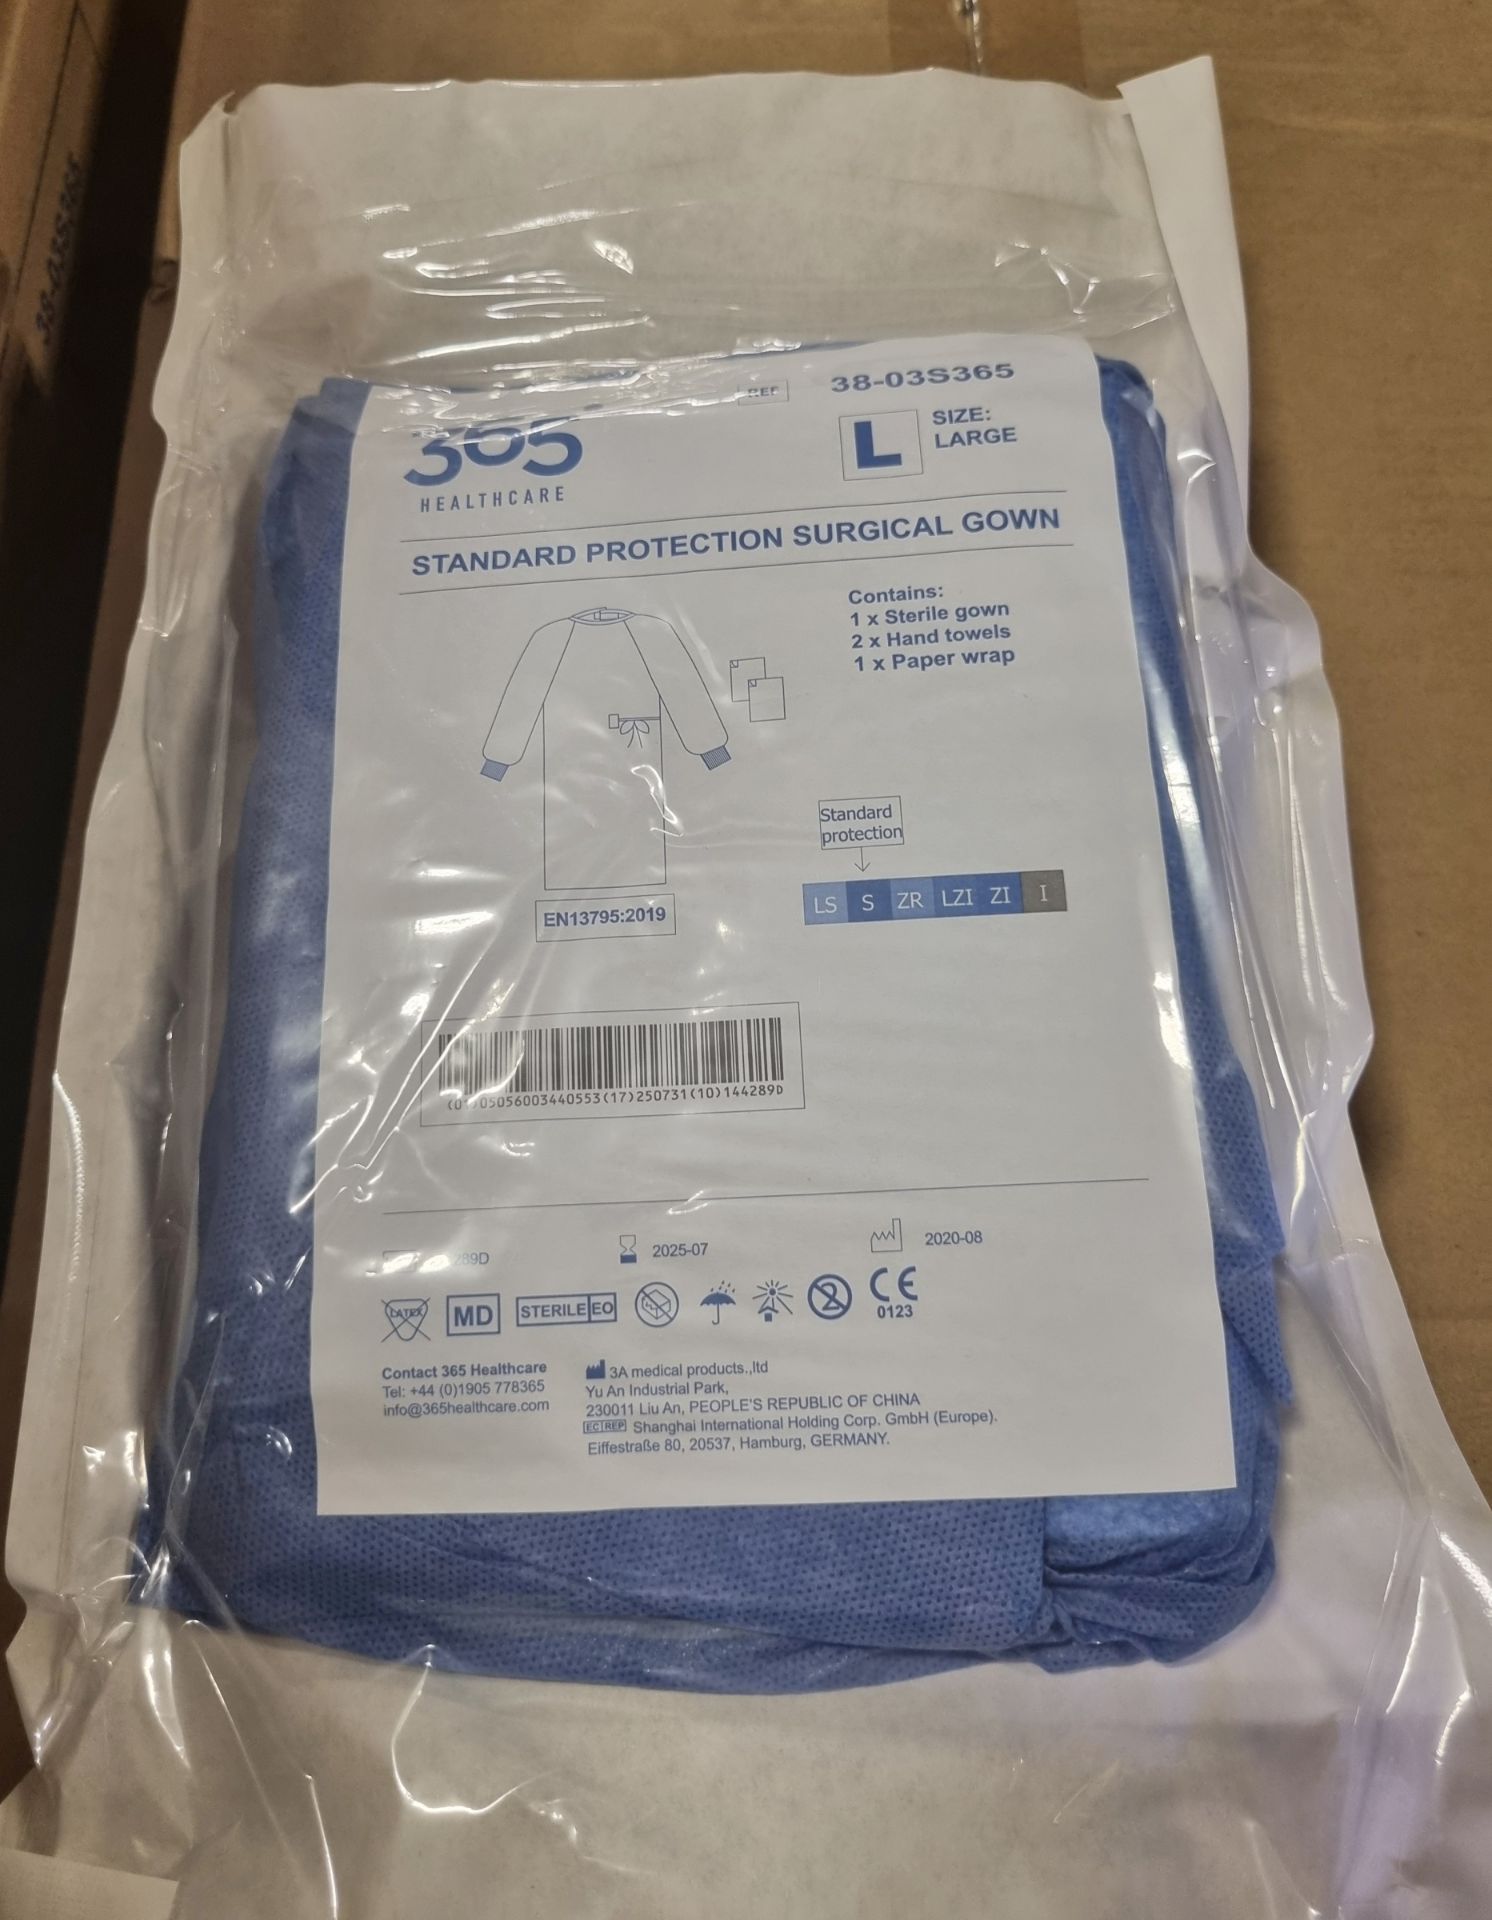 19x boxes of 365 Healthcare standard protection surgical gowns - large - expiration date: 07/2025 - Image 4 of 4